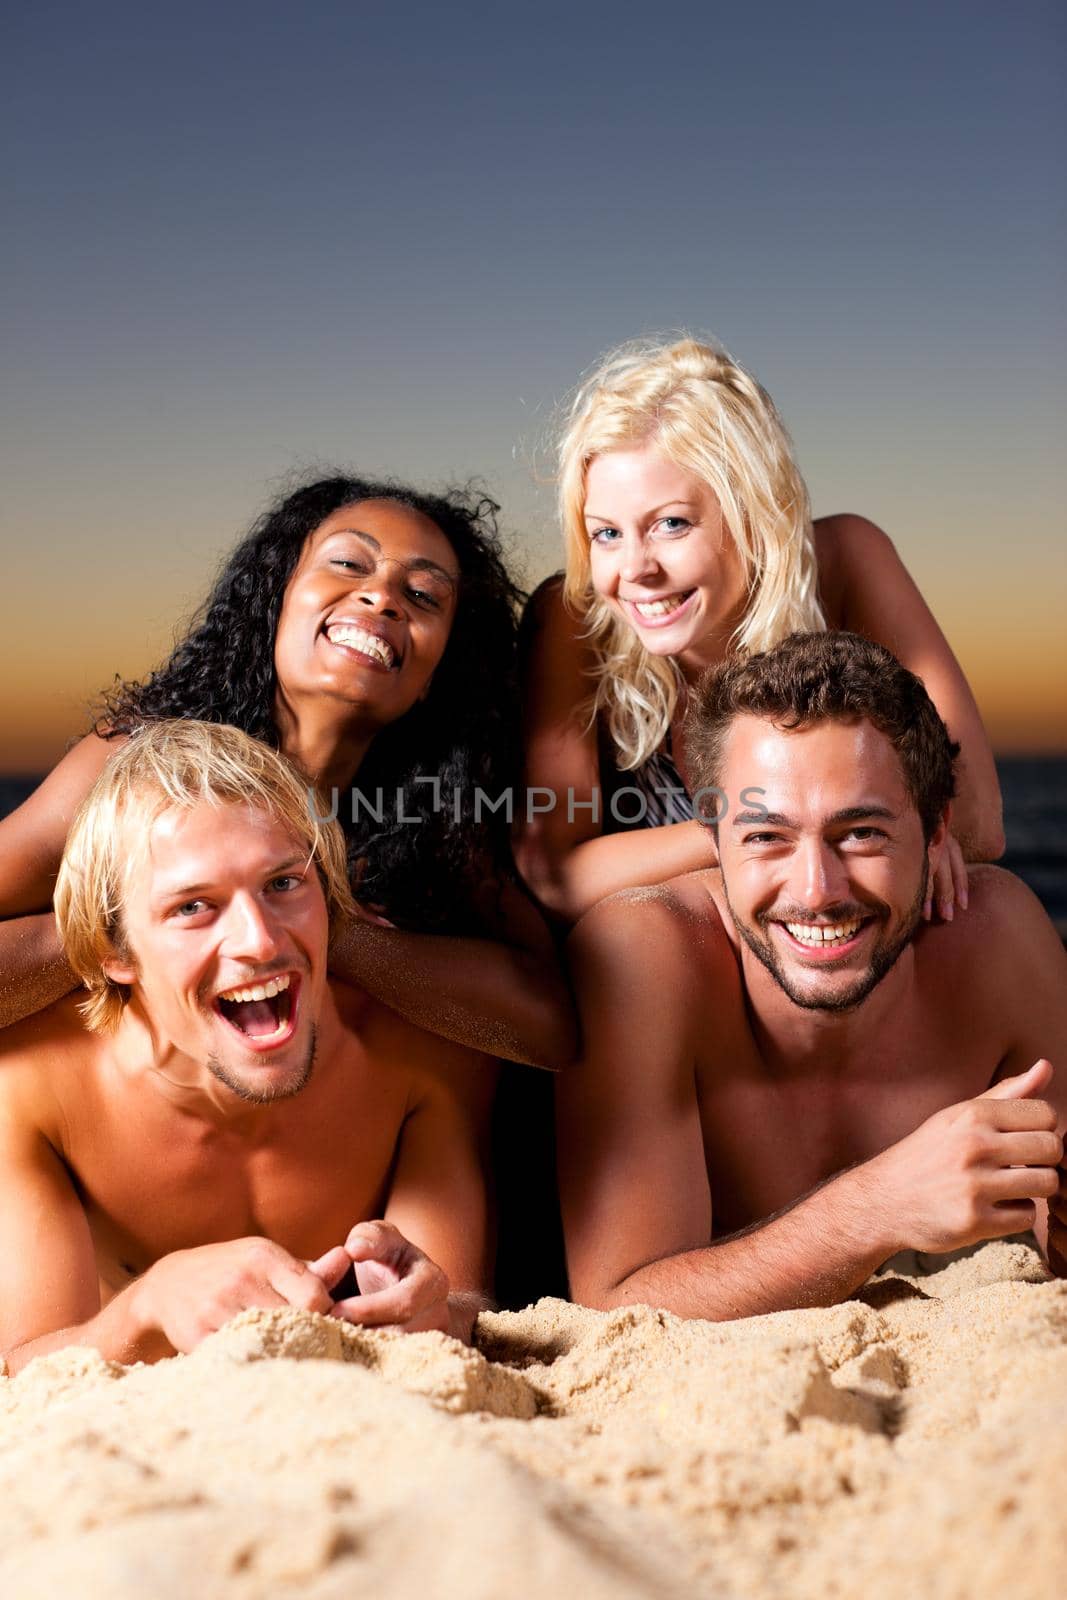 Group of four friends - men and women - sitting on the beach against the afterglow of a sunset over the ocean